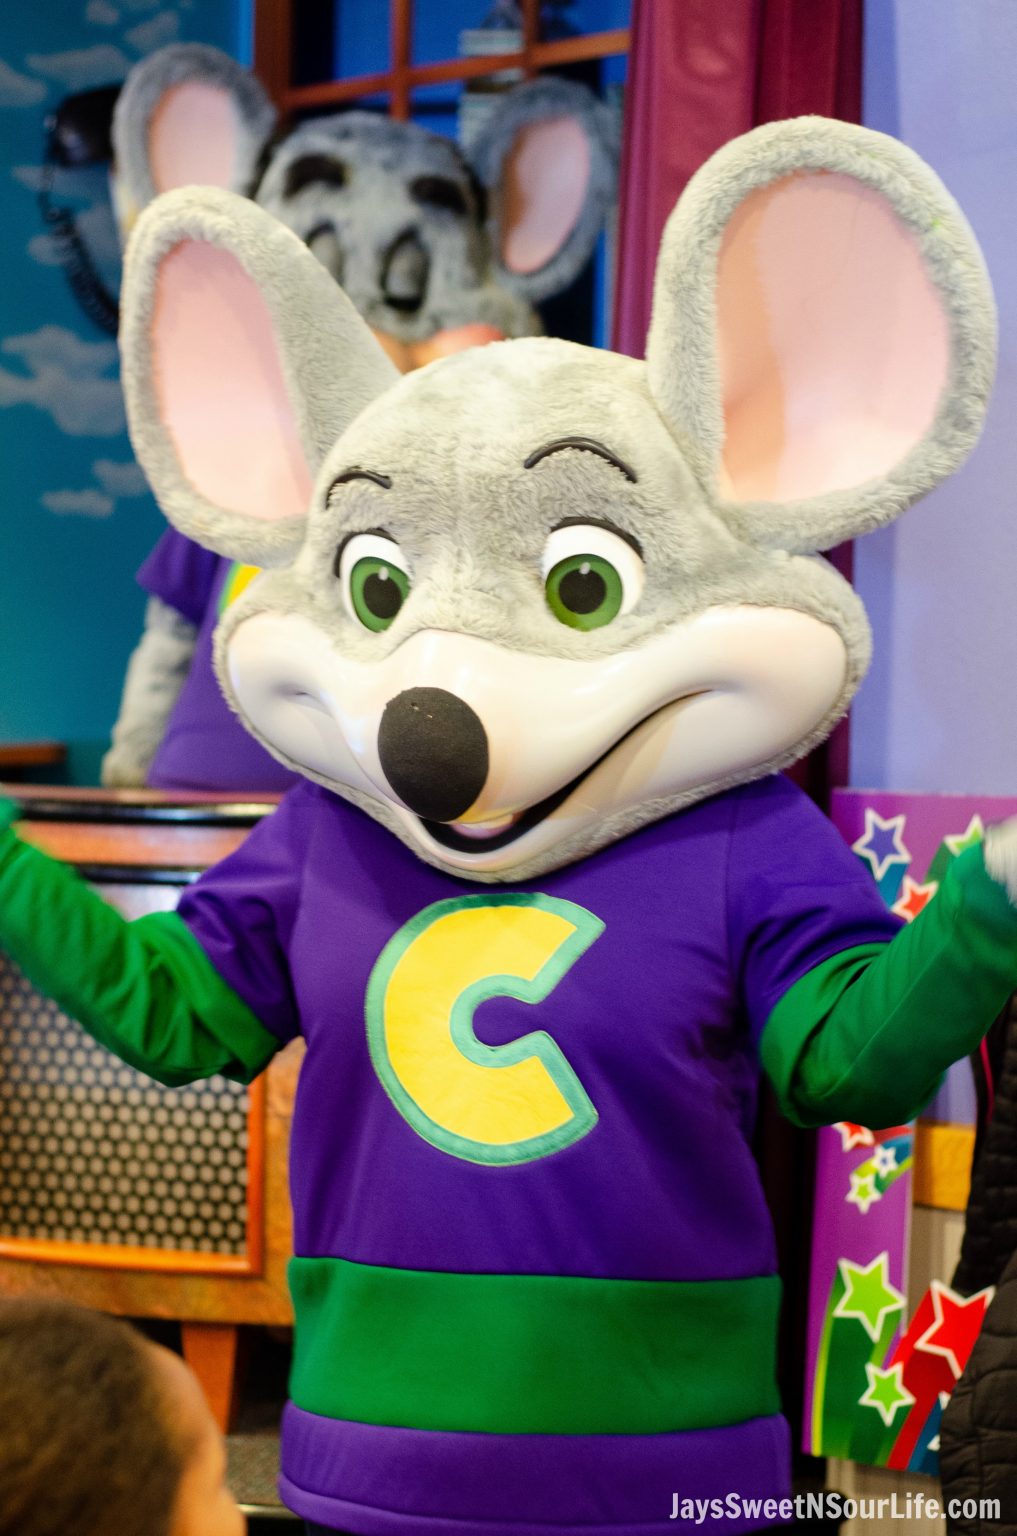 Chuck E. Cheese Files for Bankruptcy after 43 Years of Business The